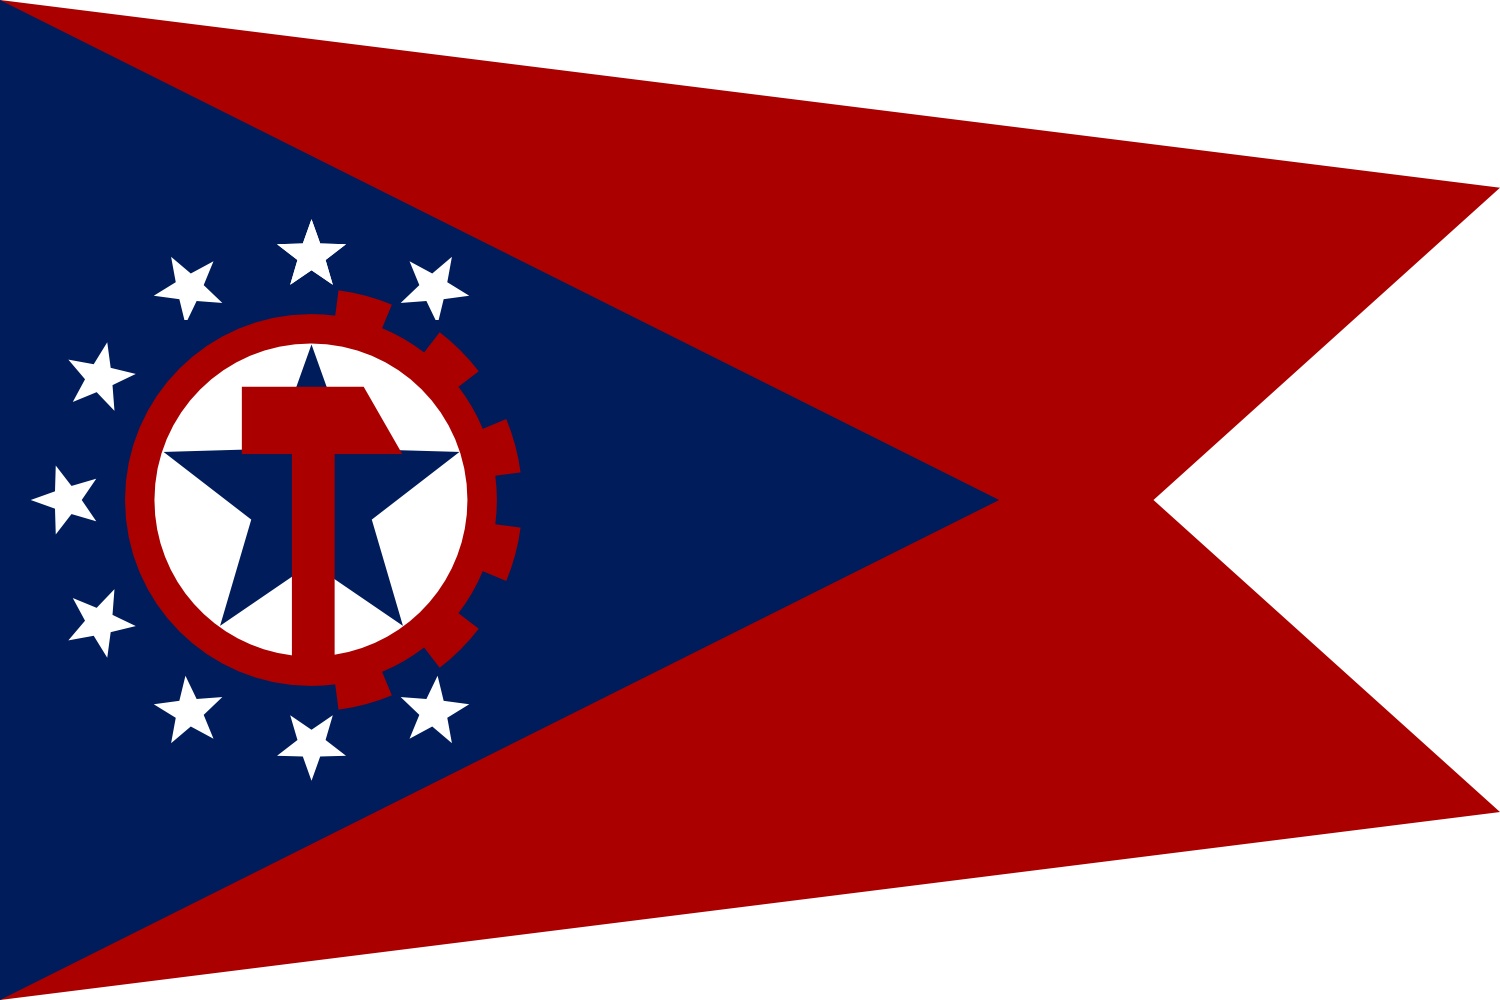 And Ohio, Thanks To All Who Contributed Credit Has - Socialist Ohio Flag (1500x1000)